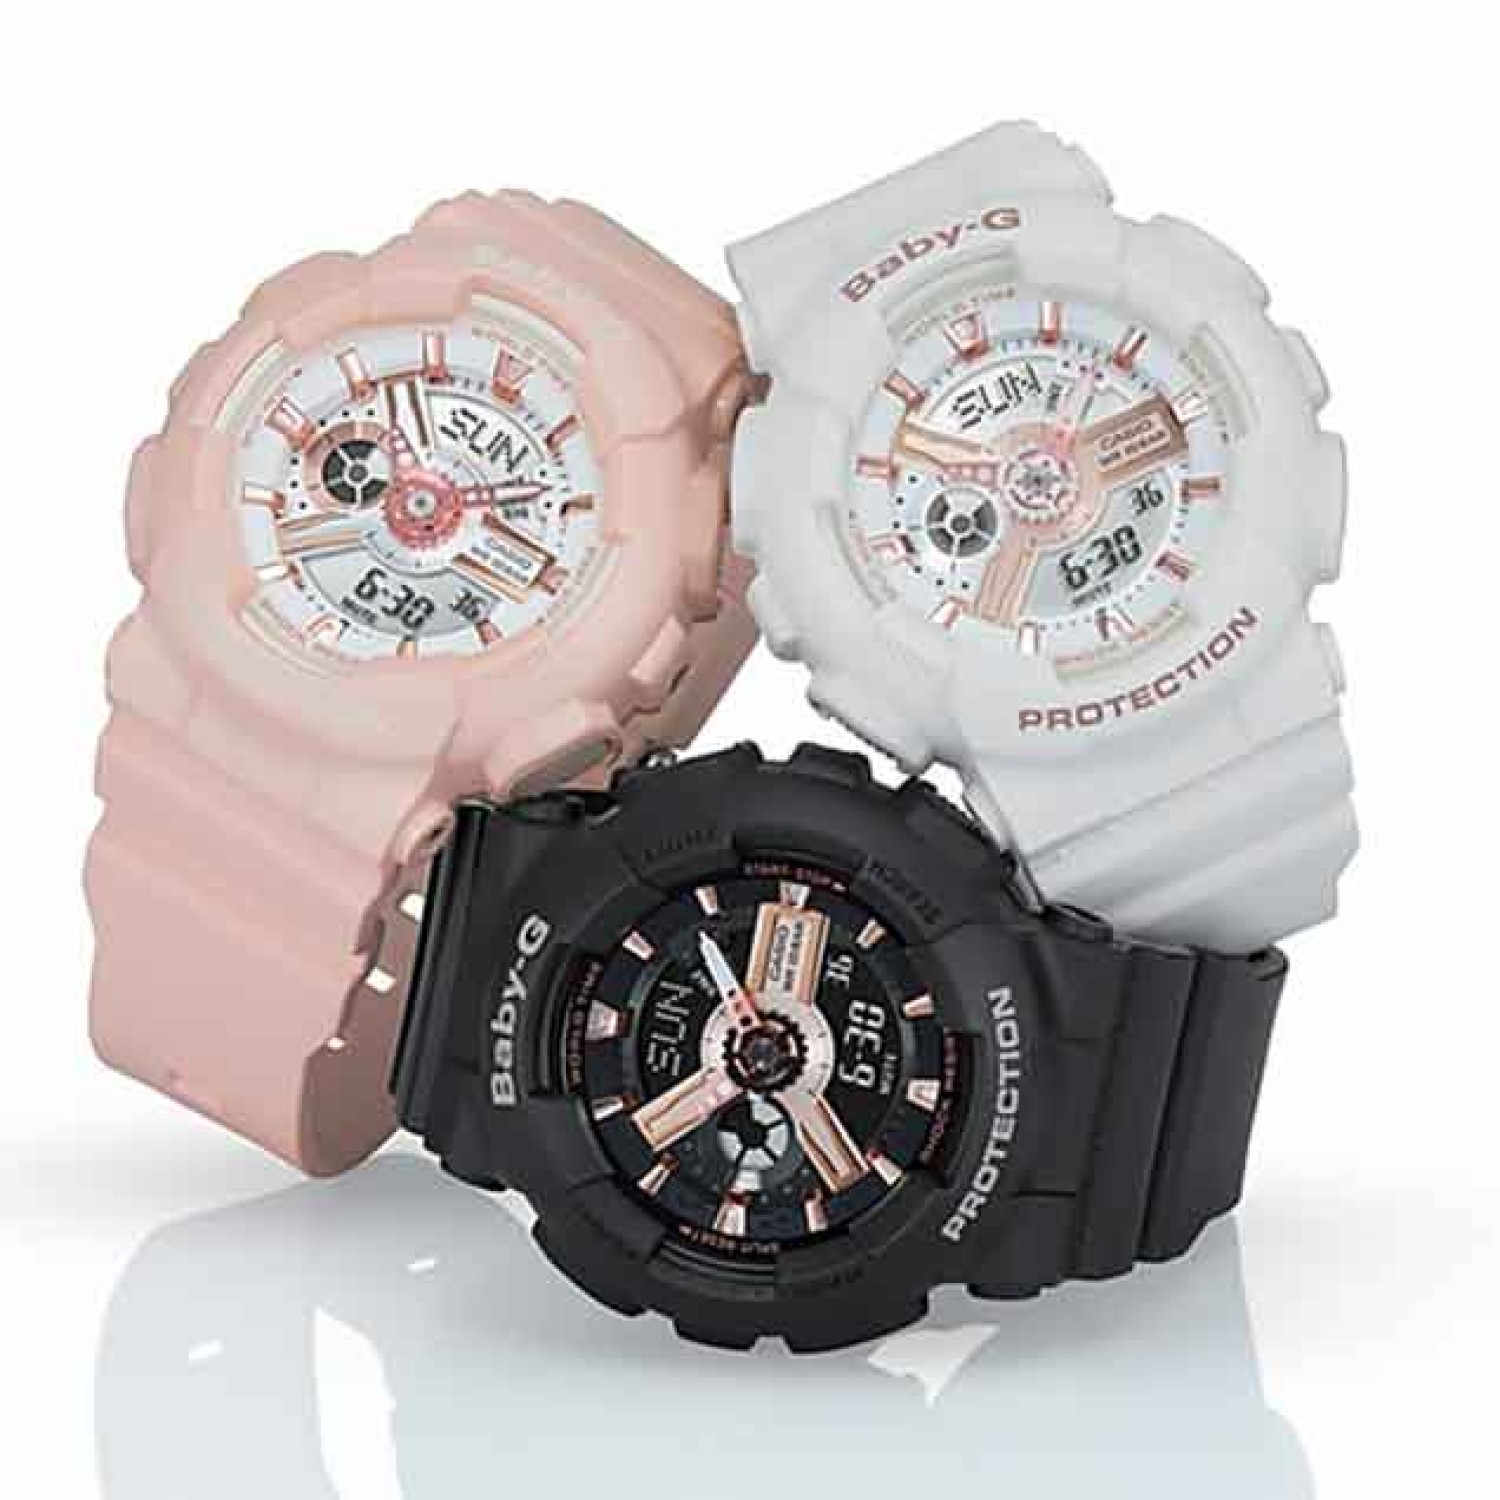 BA110RG-4A Casio BABY-G Pink Gold Watch. Pink Gold Index: From BABY-G, the casual watch for active women, comes a collection of new models with designs accented with rose gold metallic elements, based on the popular mannish design BA-110. These models are